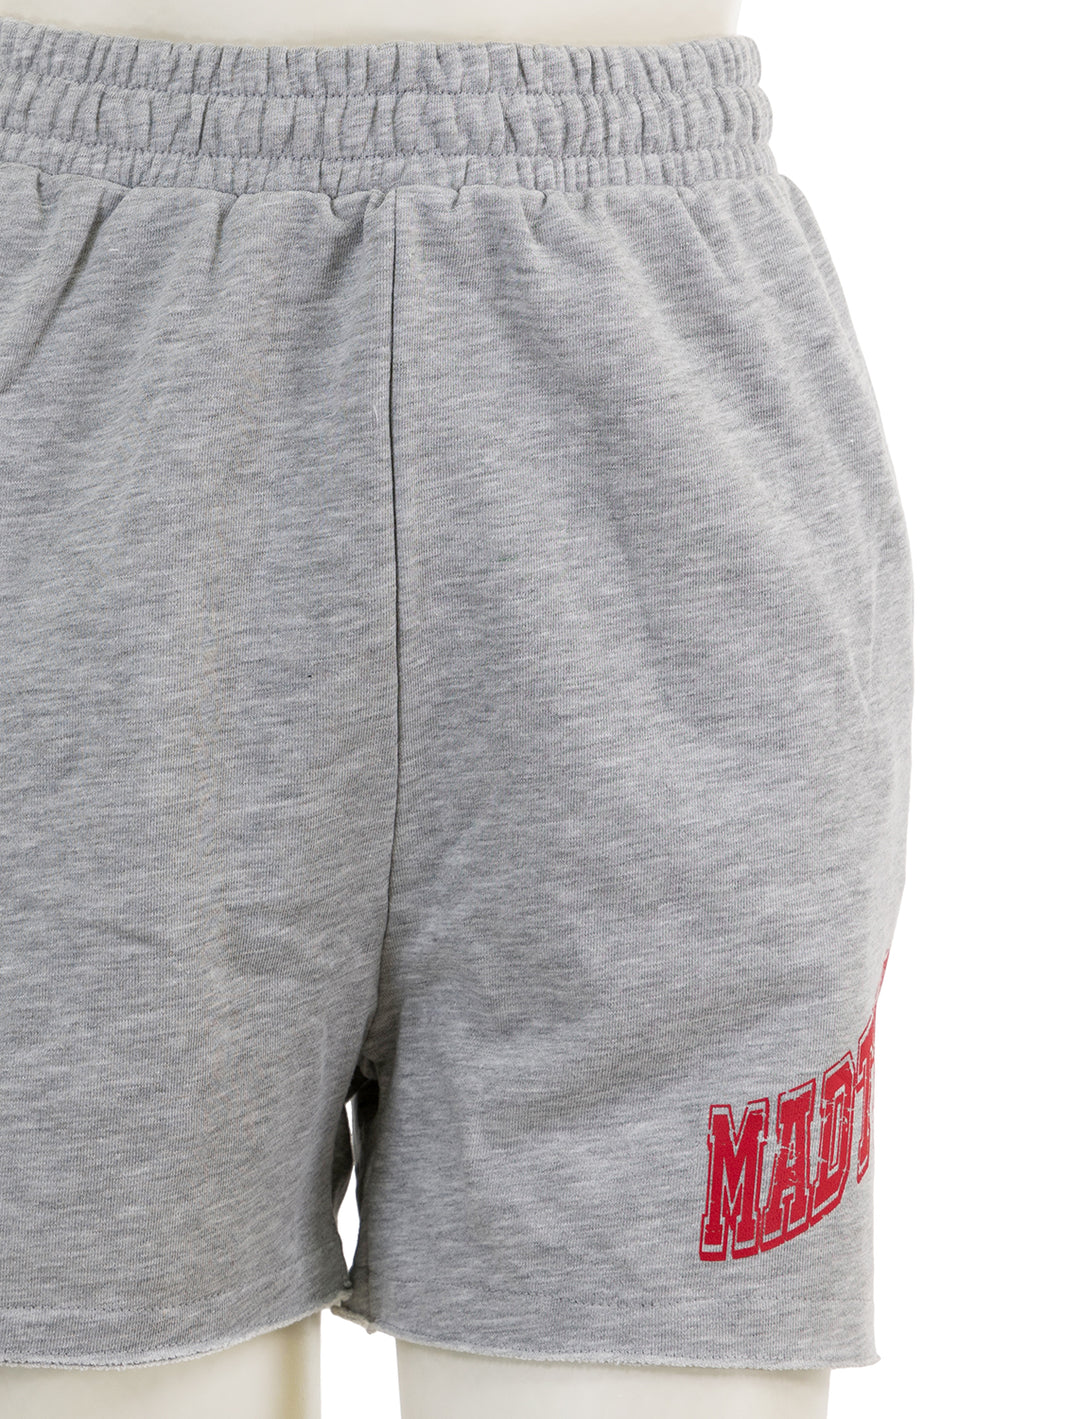 Close-up view of Recess Apparel's Madtown Sweat Shorts in Grey.